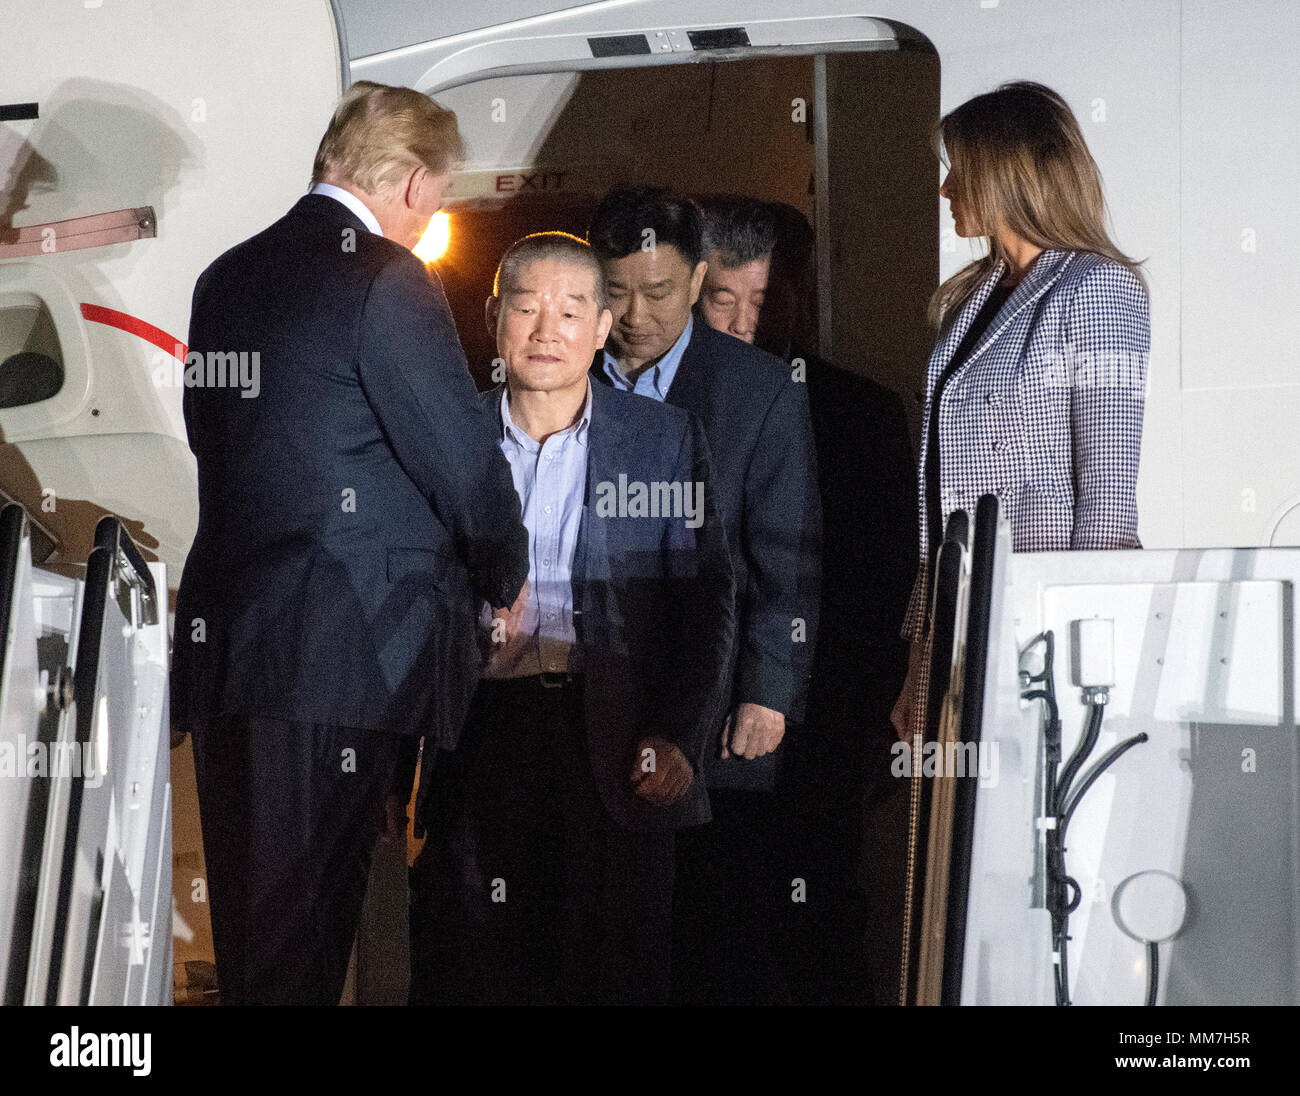 United States President Donald J. Trump welcomes Kim Dong Chul, Kim Hak Song and Tony Kim back to the US at Joint Base Andrews in Maryland on Thursday, May 10, 2018. The three men were imprisoned in North Korea for periods ranging from one and two years. They were released to US Secretary of State Mike Pompeo as a good-will gesture in the lead-up to the talks between President Trump and North Korean leader Kim Jong Un. Credit: Ron Sachs/CNP | usage worldwide Stock Photo